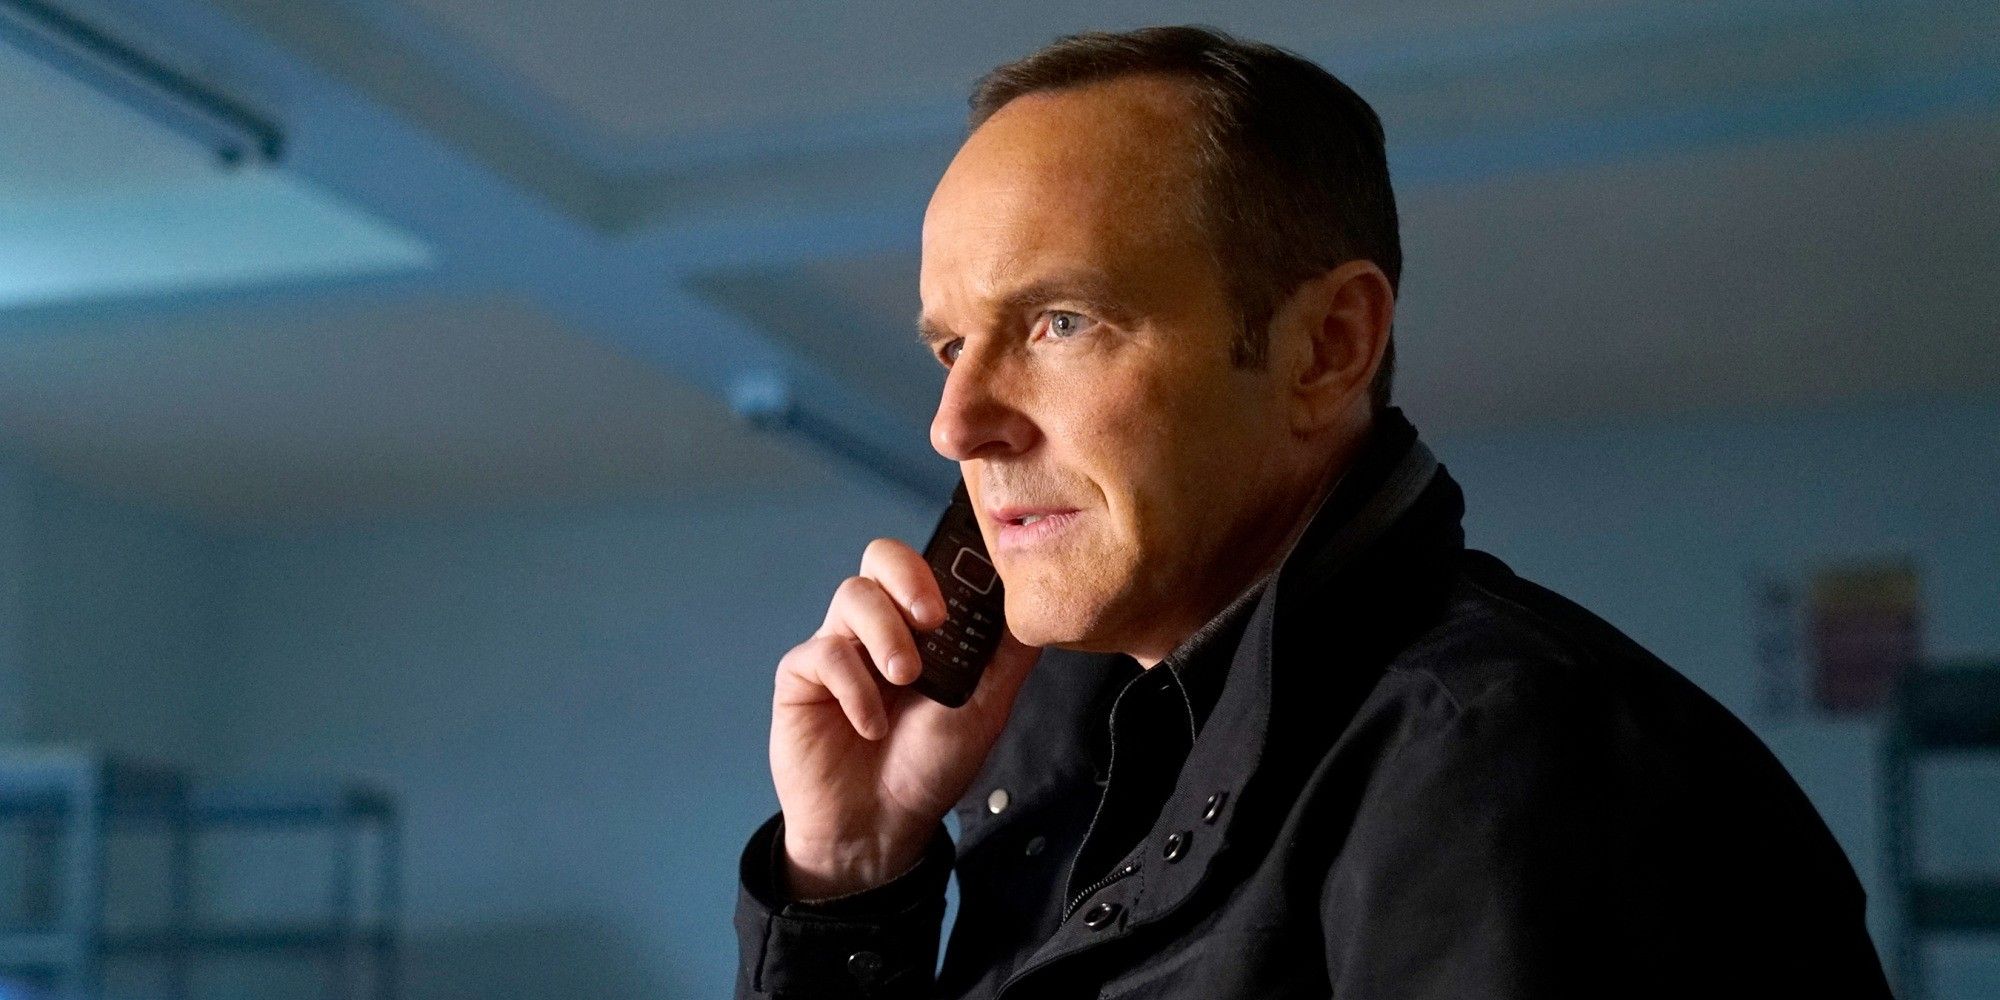 Clark Gregg as Phil Coulson in Agents of SHIELD